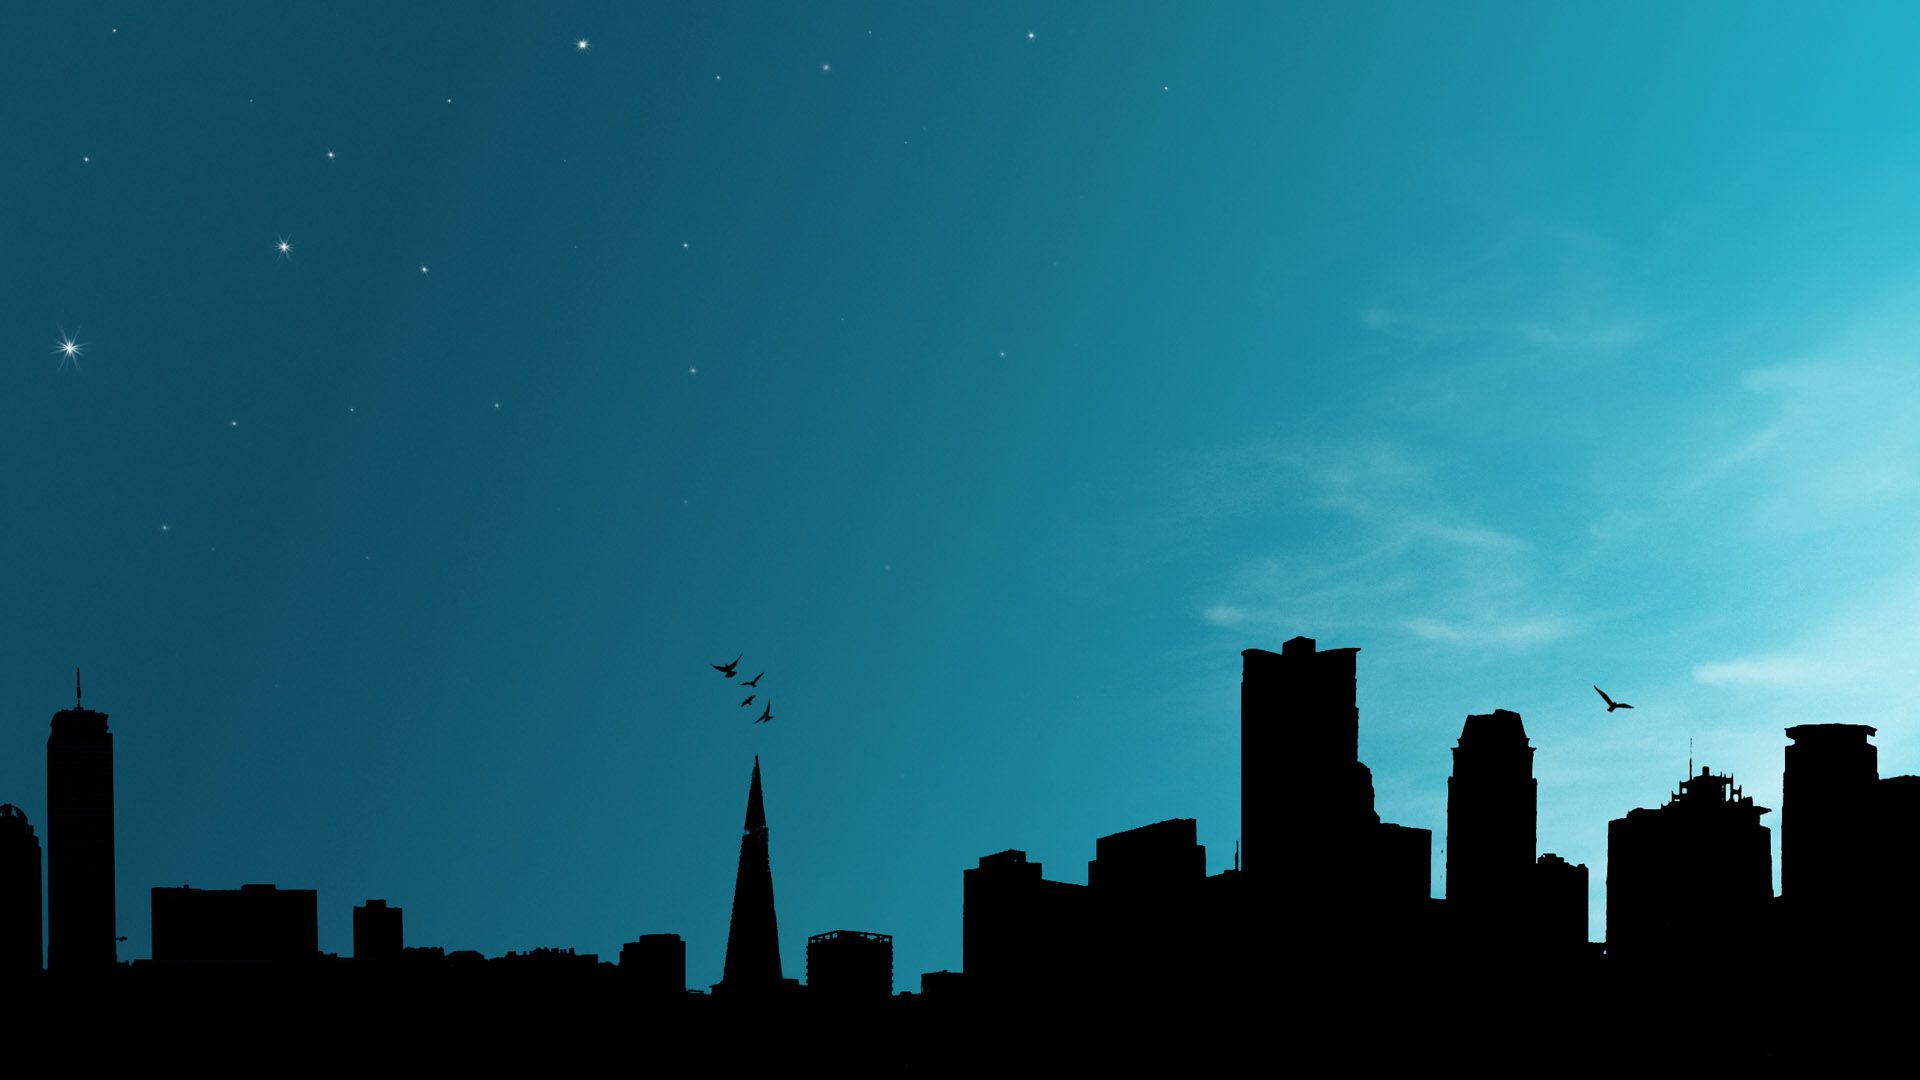 Cool Background Dark City Silhouette #4235932, 1920x1080 | All For ...